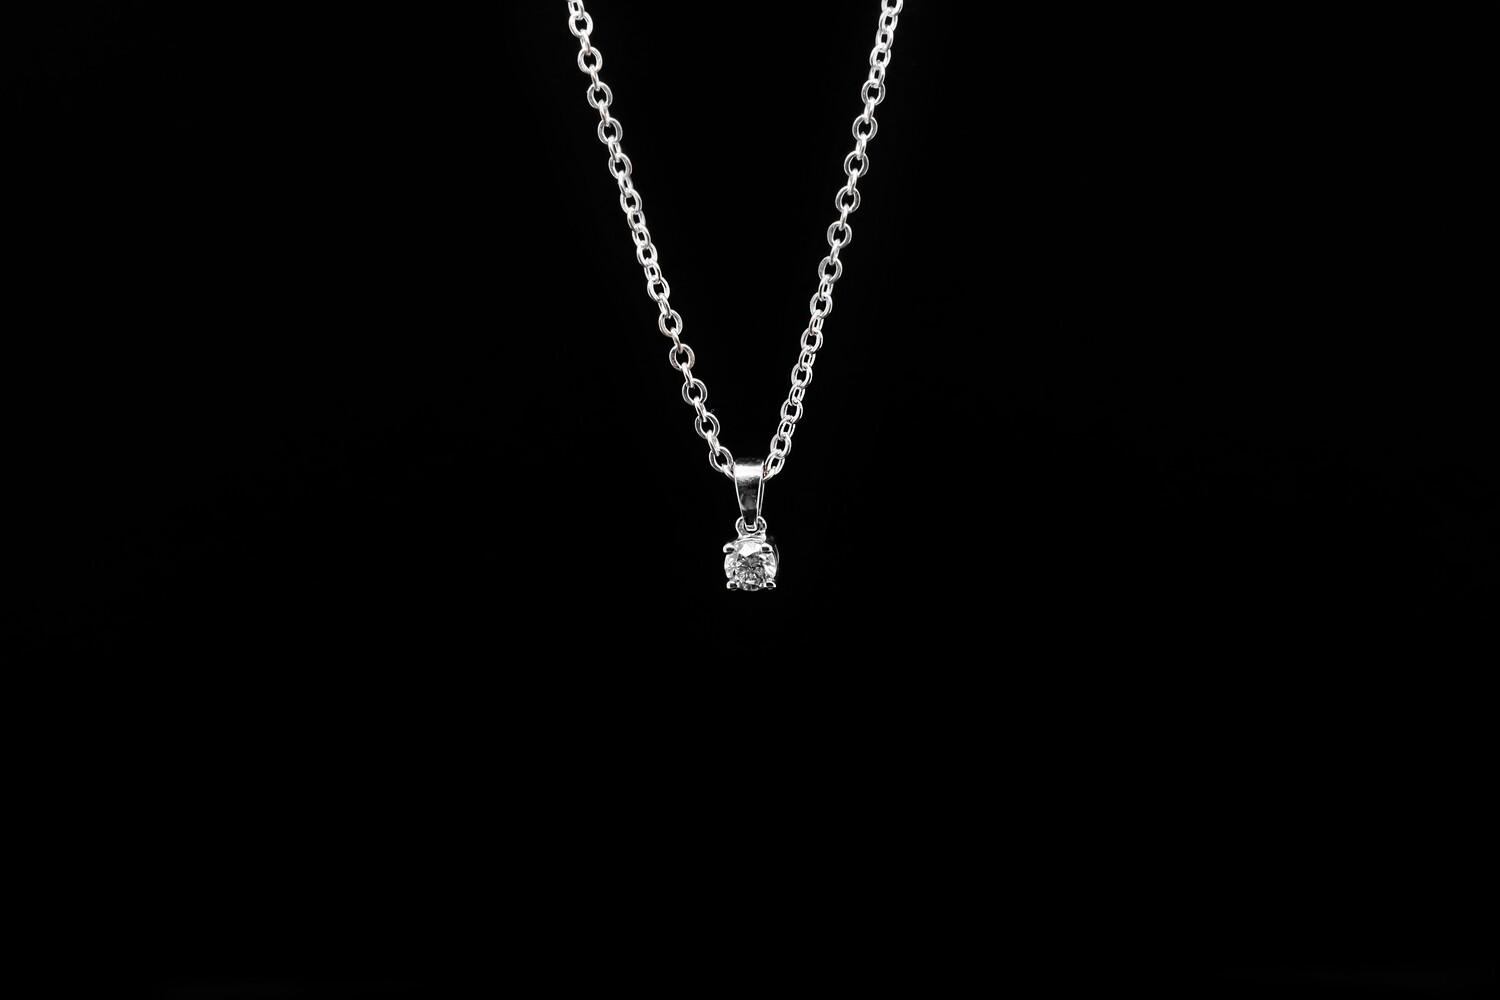 Diamond Fashion Pendant -14ct White Gold, 0.15ct TDW ( included Silver chain)